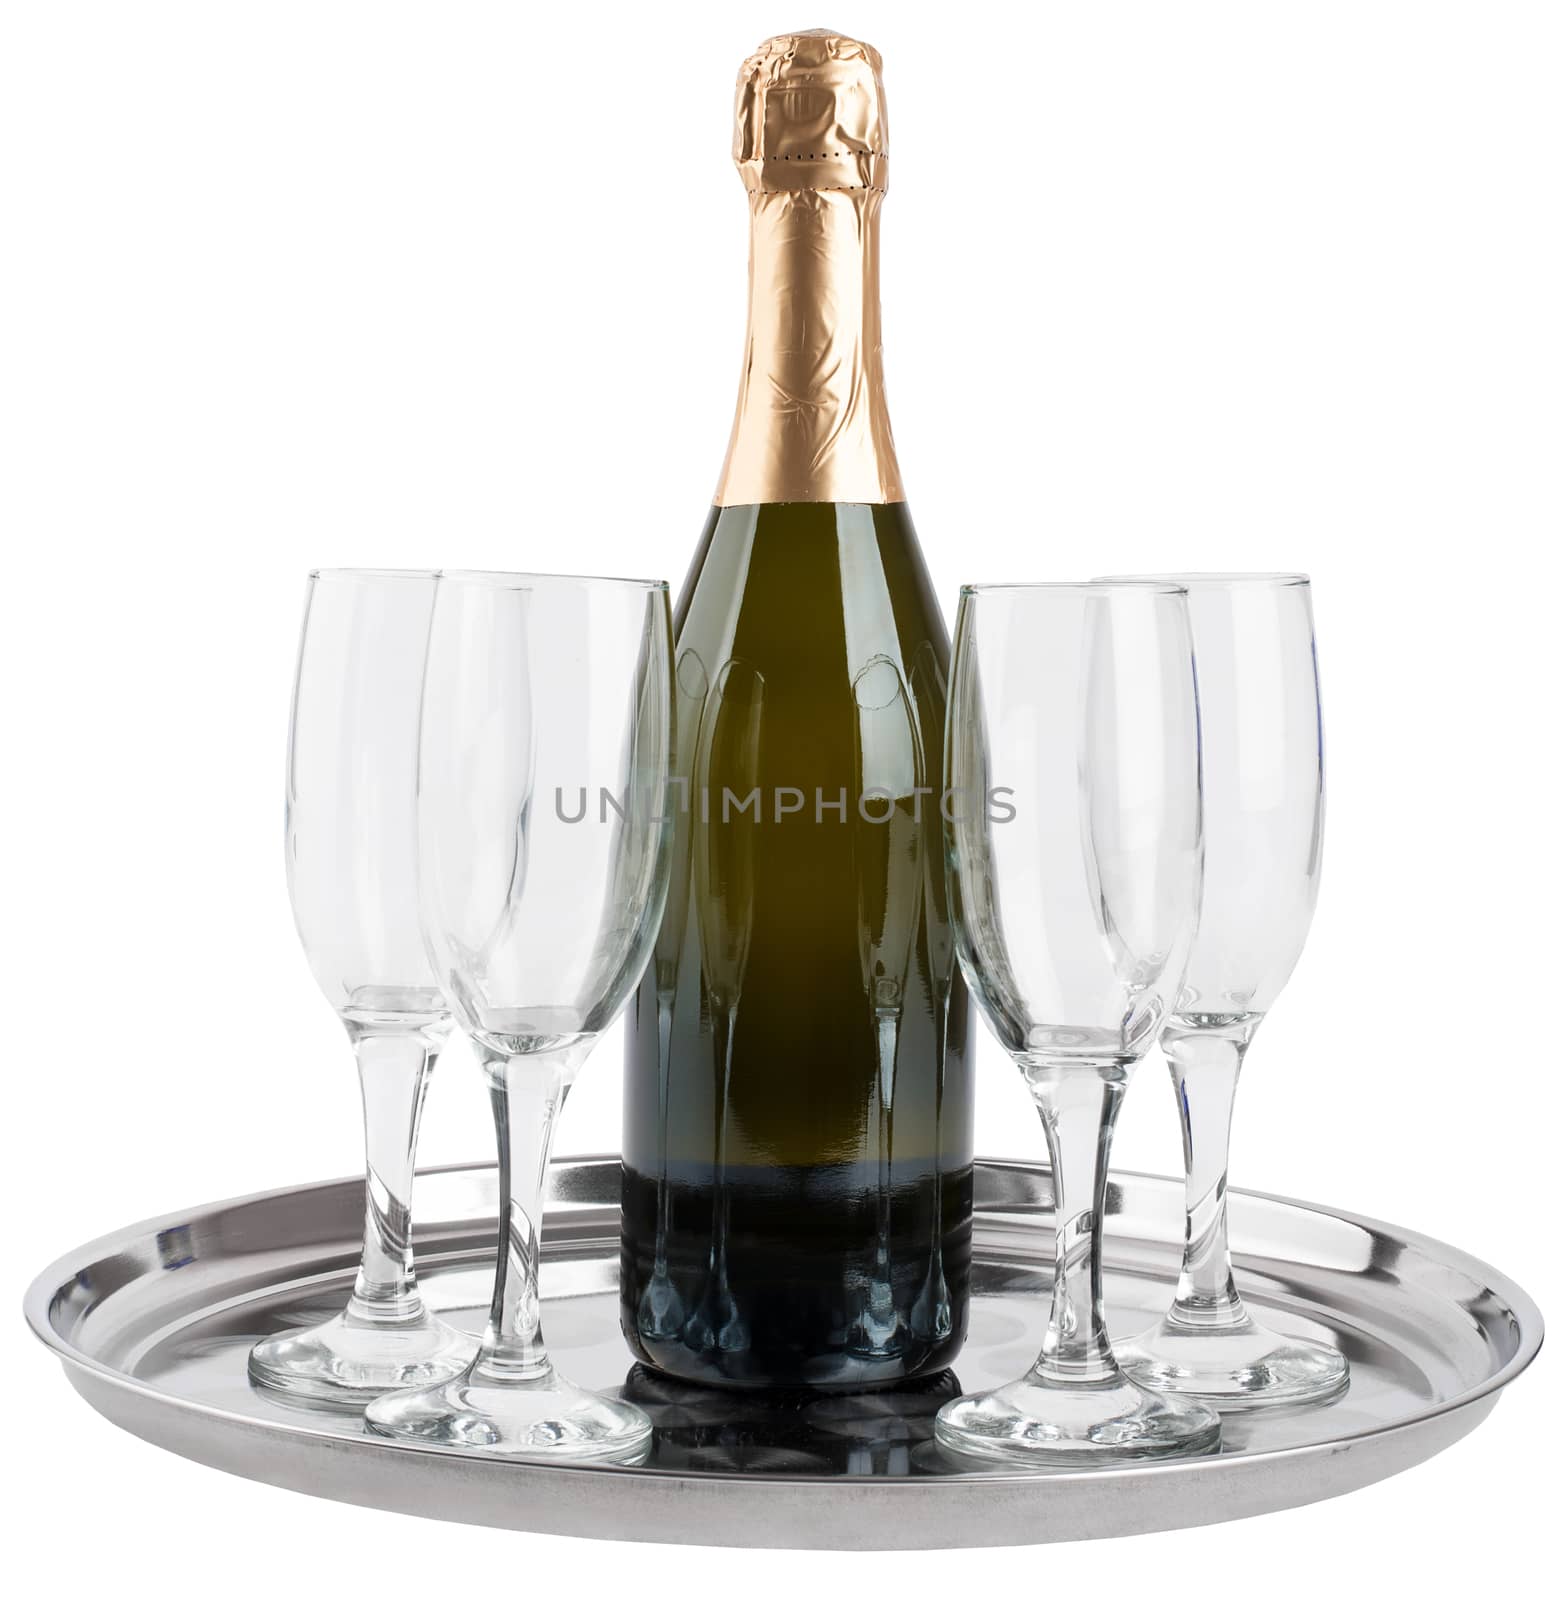 Champagne bottle and four champagne glasses on tray isolated on white background